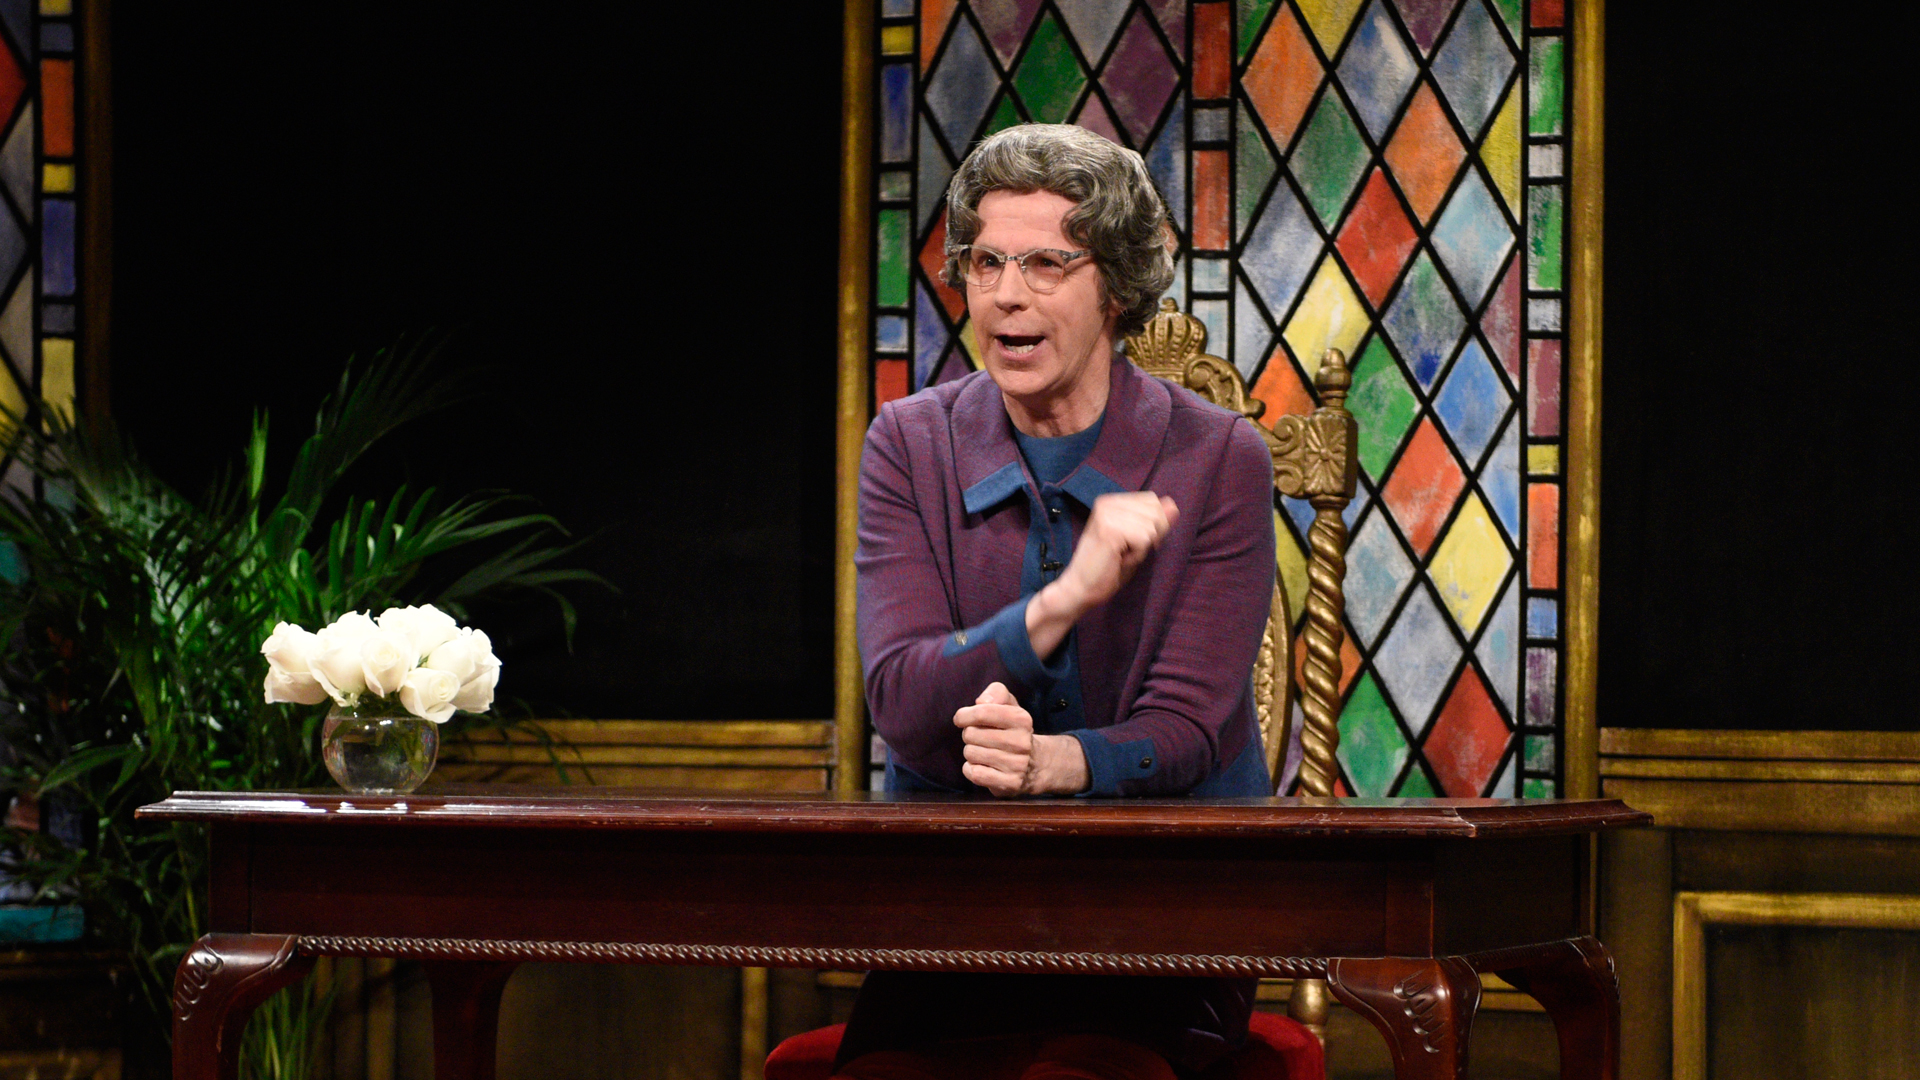 Watch Church Lady Cold Open From Saturday Night Live - NBC.com1920 x 1080